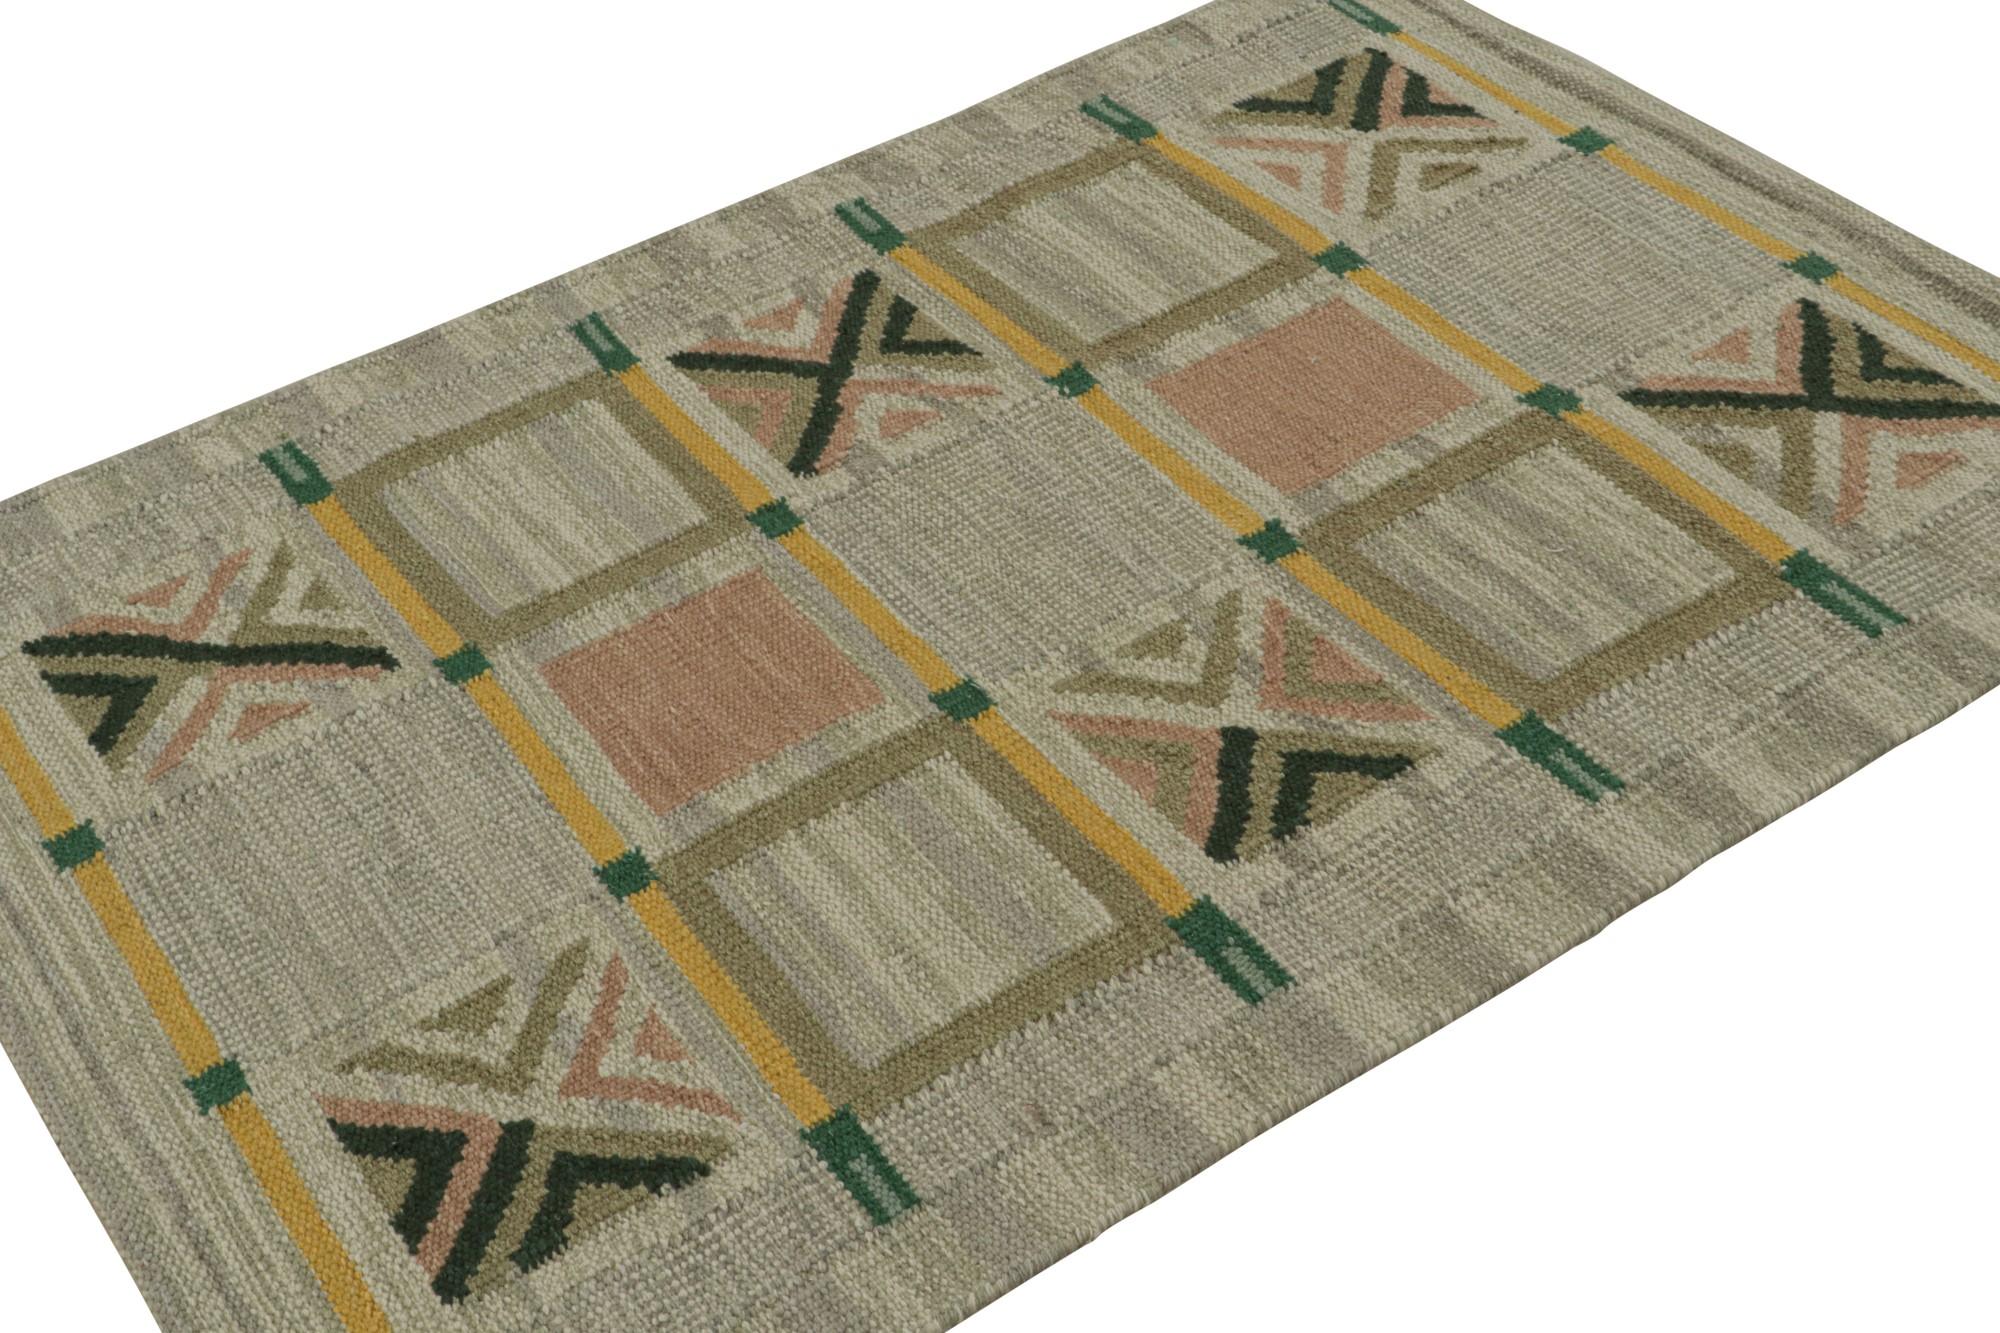 A smart 4x6 custom Swedish kilim from our award-winning Scandinavian flat weave collection. Handwoven in wool & undyed natural yarns.

On the Design: 

This rug enjoys geometric patterns in tones of grey, green & gold. Keen eyes will admire undyed,